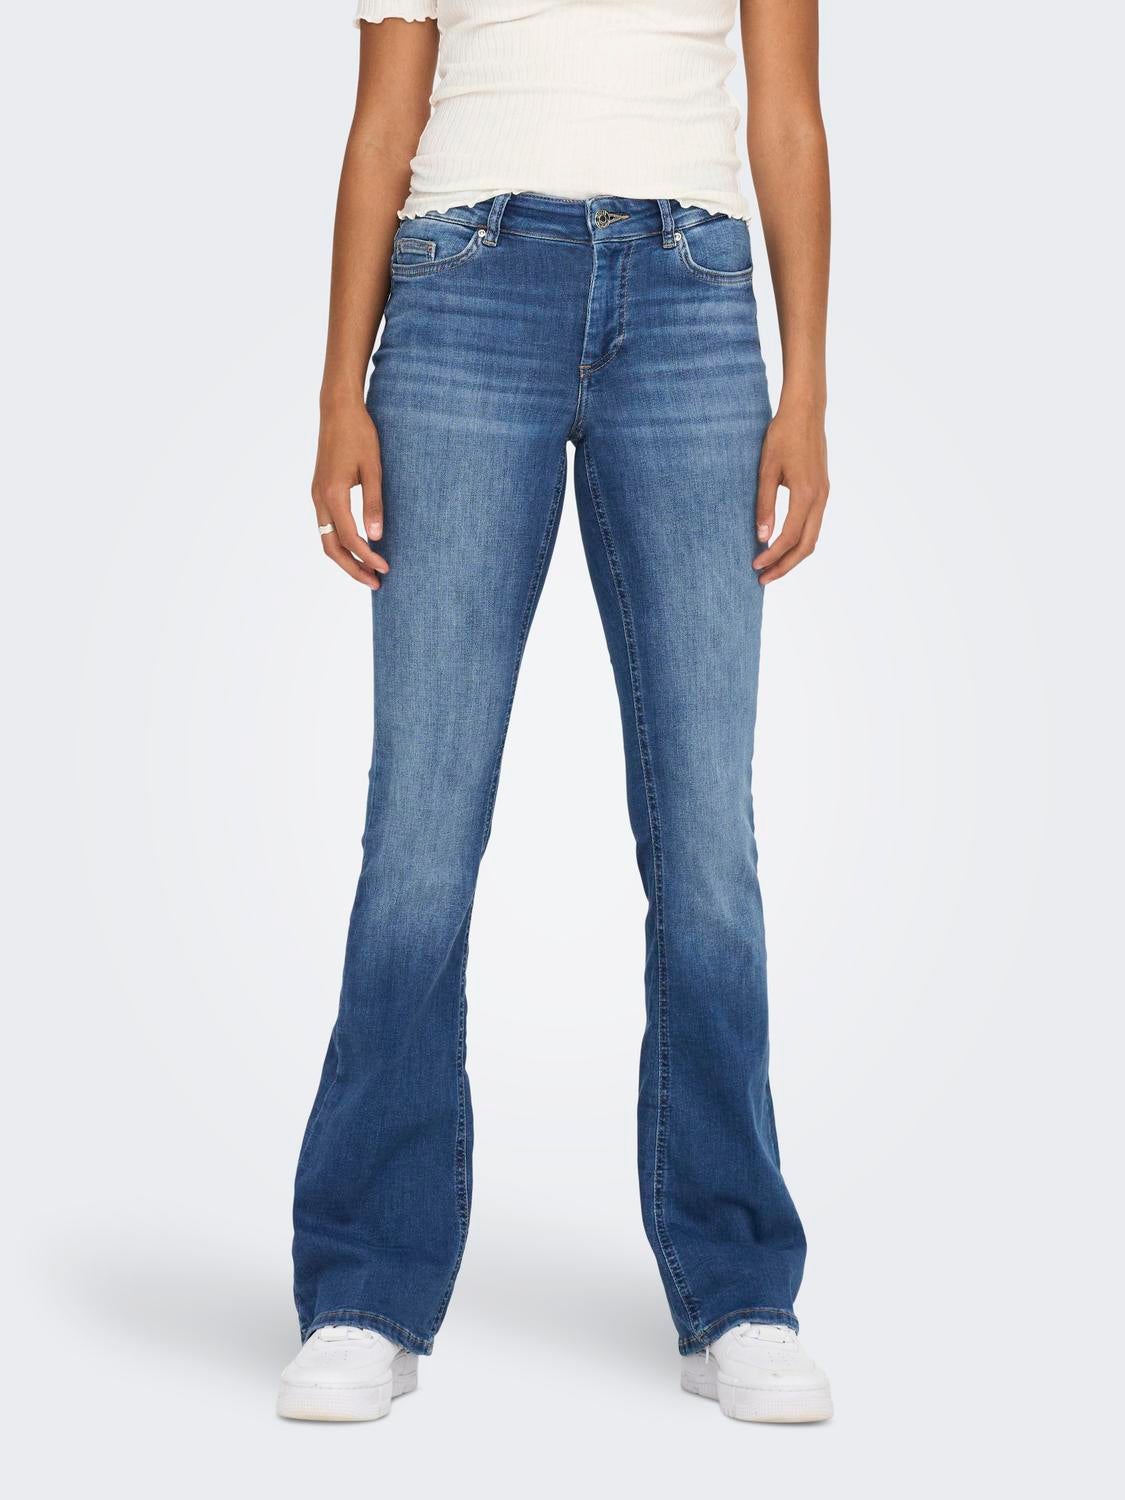 Bootcut & Flared Jeans for Women | ONLY